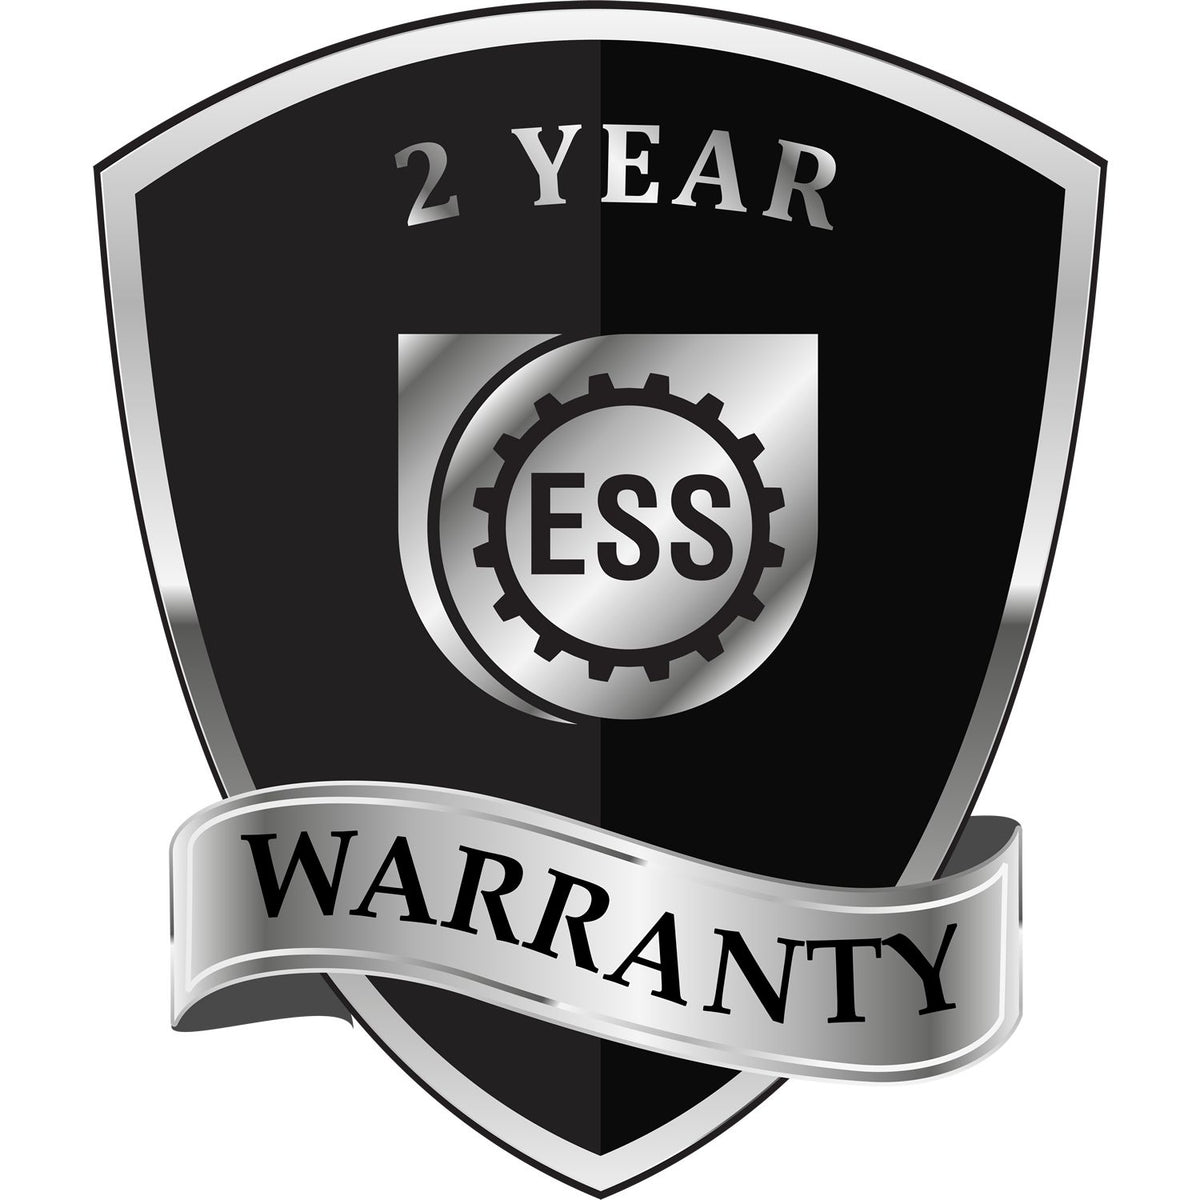 A black and silver badge or emblem showing warranty information for the Hybrid Oklahoma Landscape Architect Seal